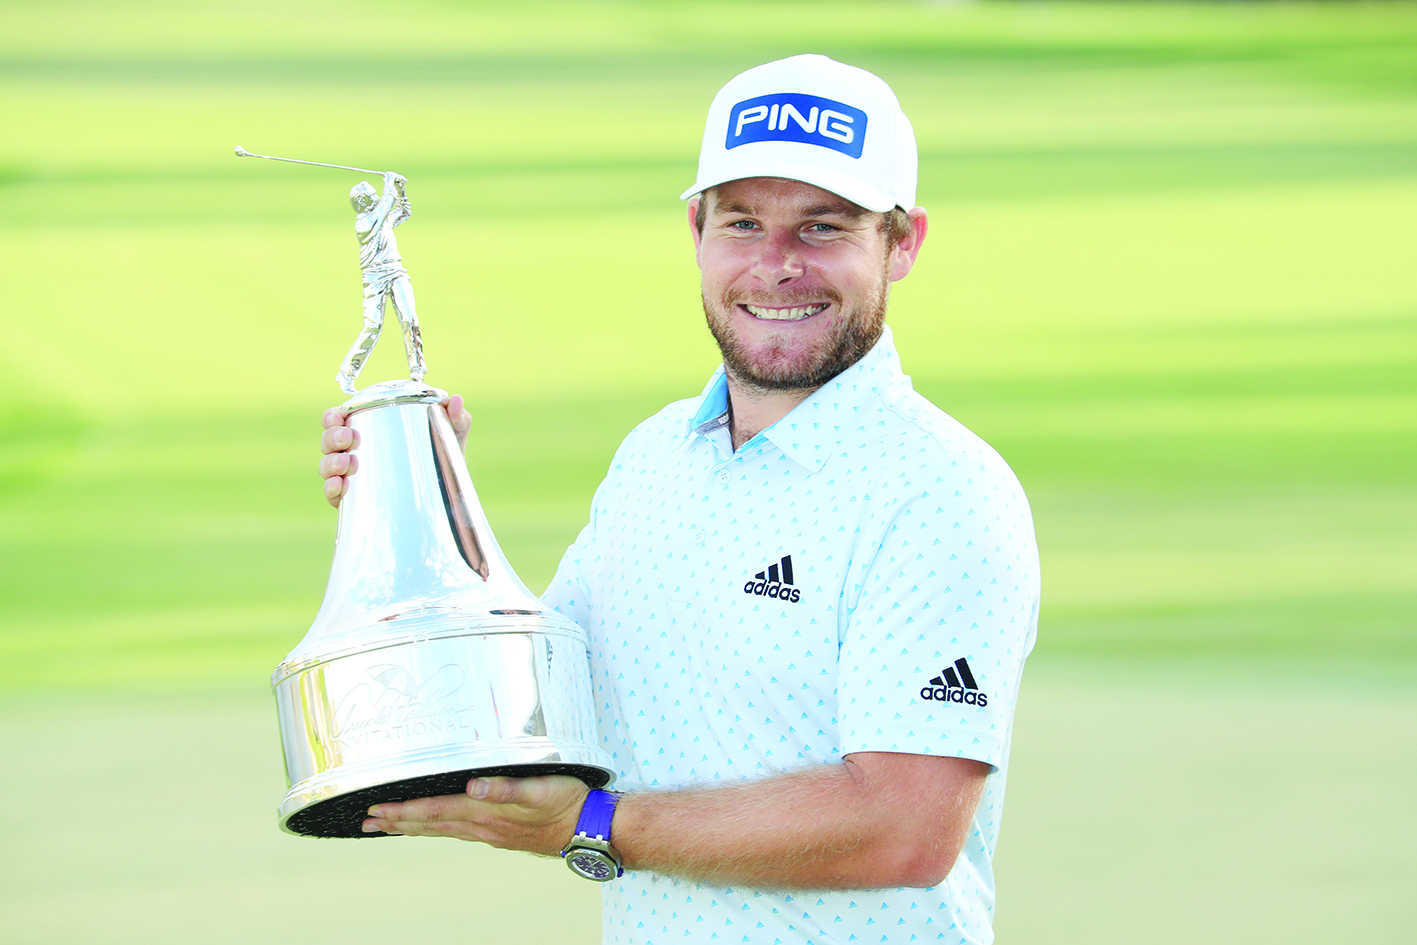 ORLANDO, FLORIDA - MARCH 08: Tyrrell Hatton of England celebrates with the trophy after winning during the final round of the Arnold Palmer Invitational Presented by MasterCard at the Bay Hill Club and Lodge on March 08, 2020 in Orlando, Florida.   Sam Greenwood/Getty Images/AFP